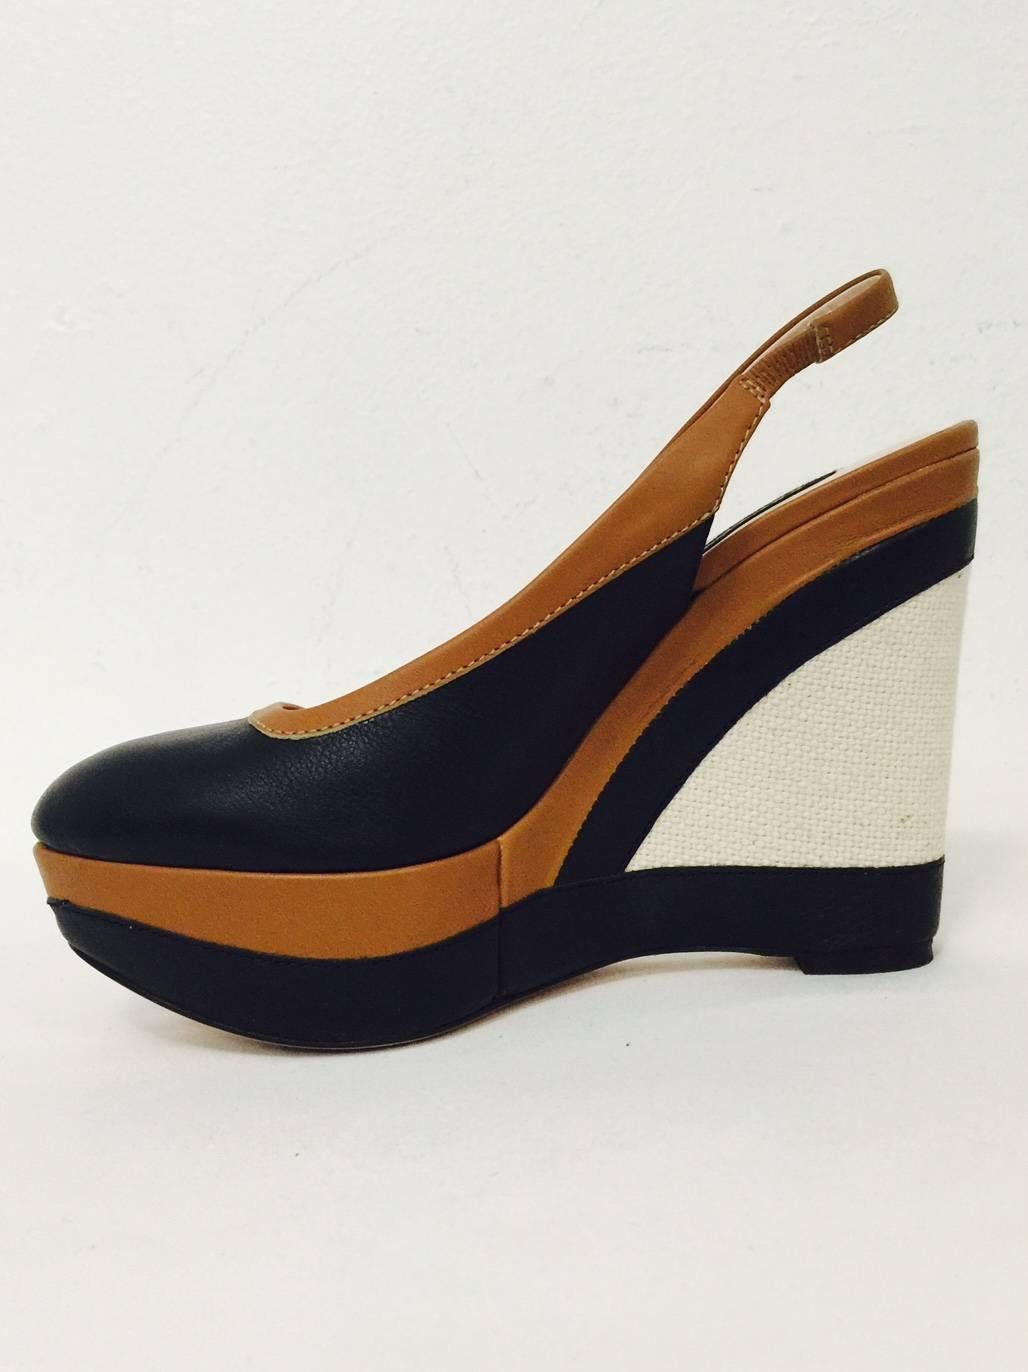 Transition into fall with these elegant Escada Navy and Toffee Leather Wedges!  Features modern platform styling, slingback design and leather lining, soles, and insoles.  The finishing touch, natural burlap details the heels!  Made in Italy. 